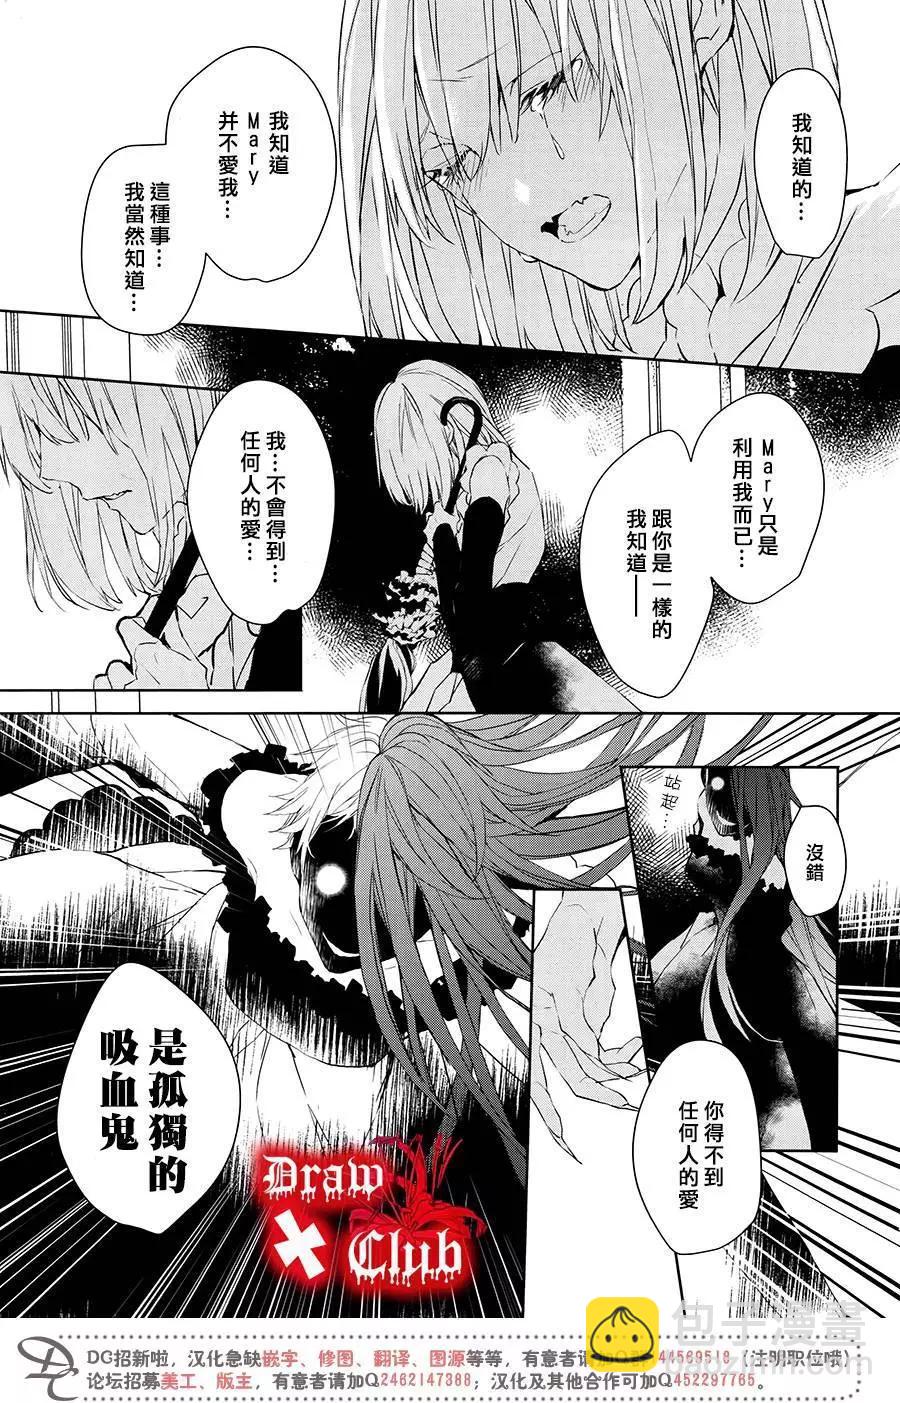 Bloody Mary - 第37回 - 4